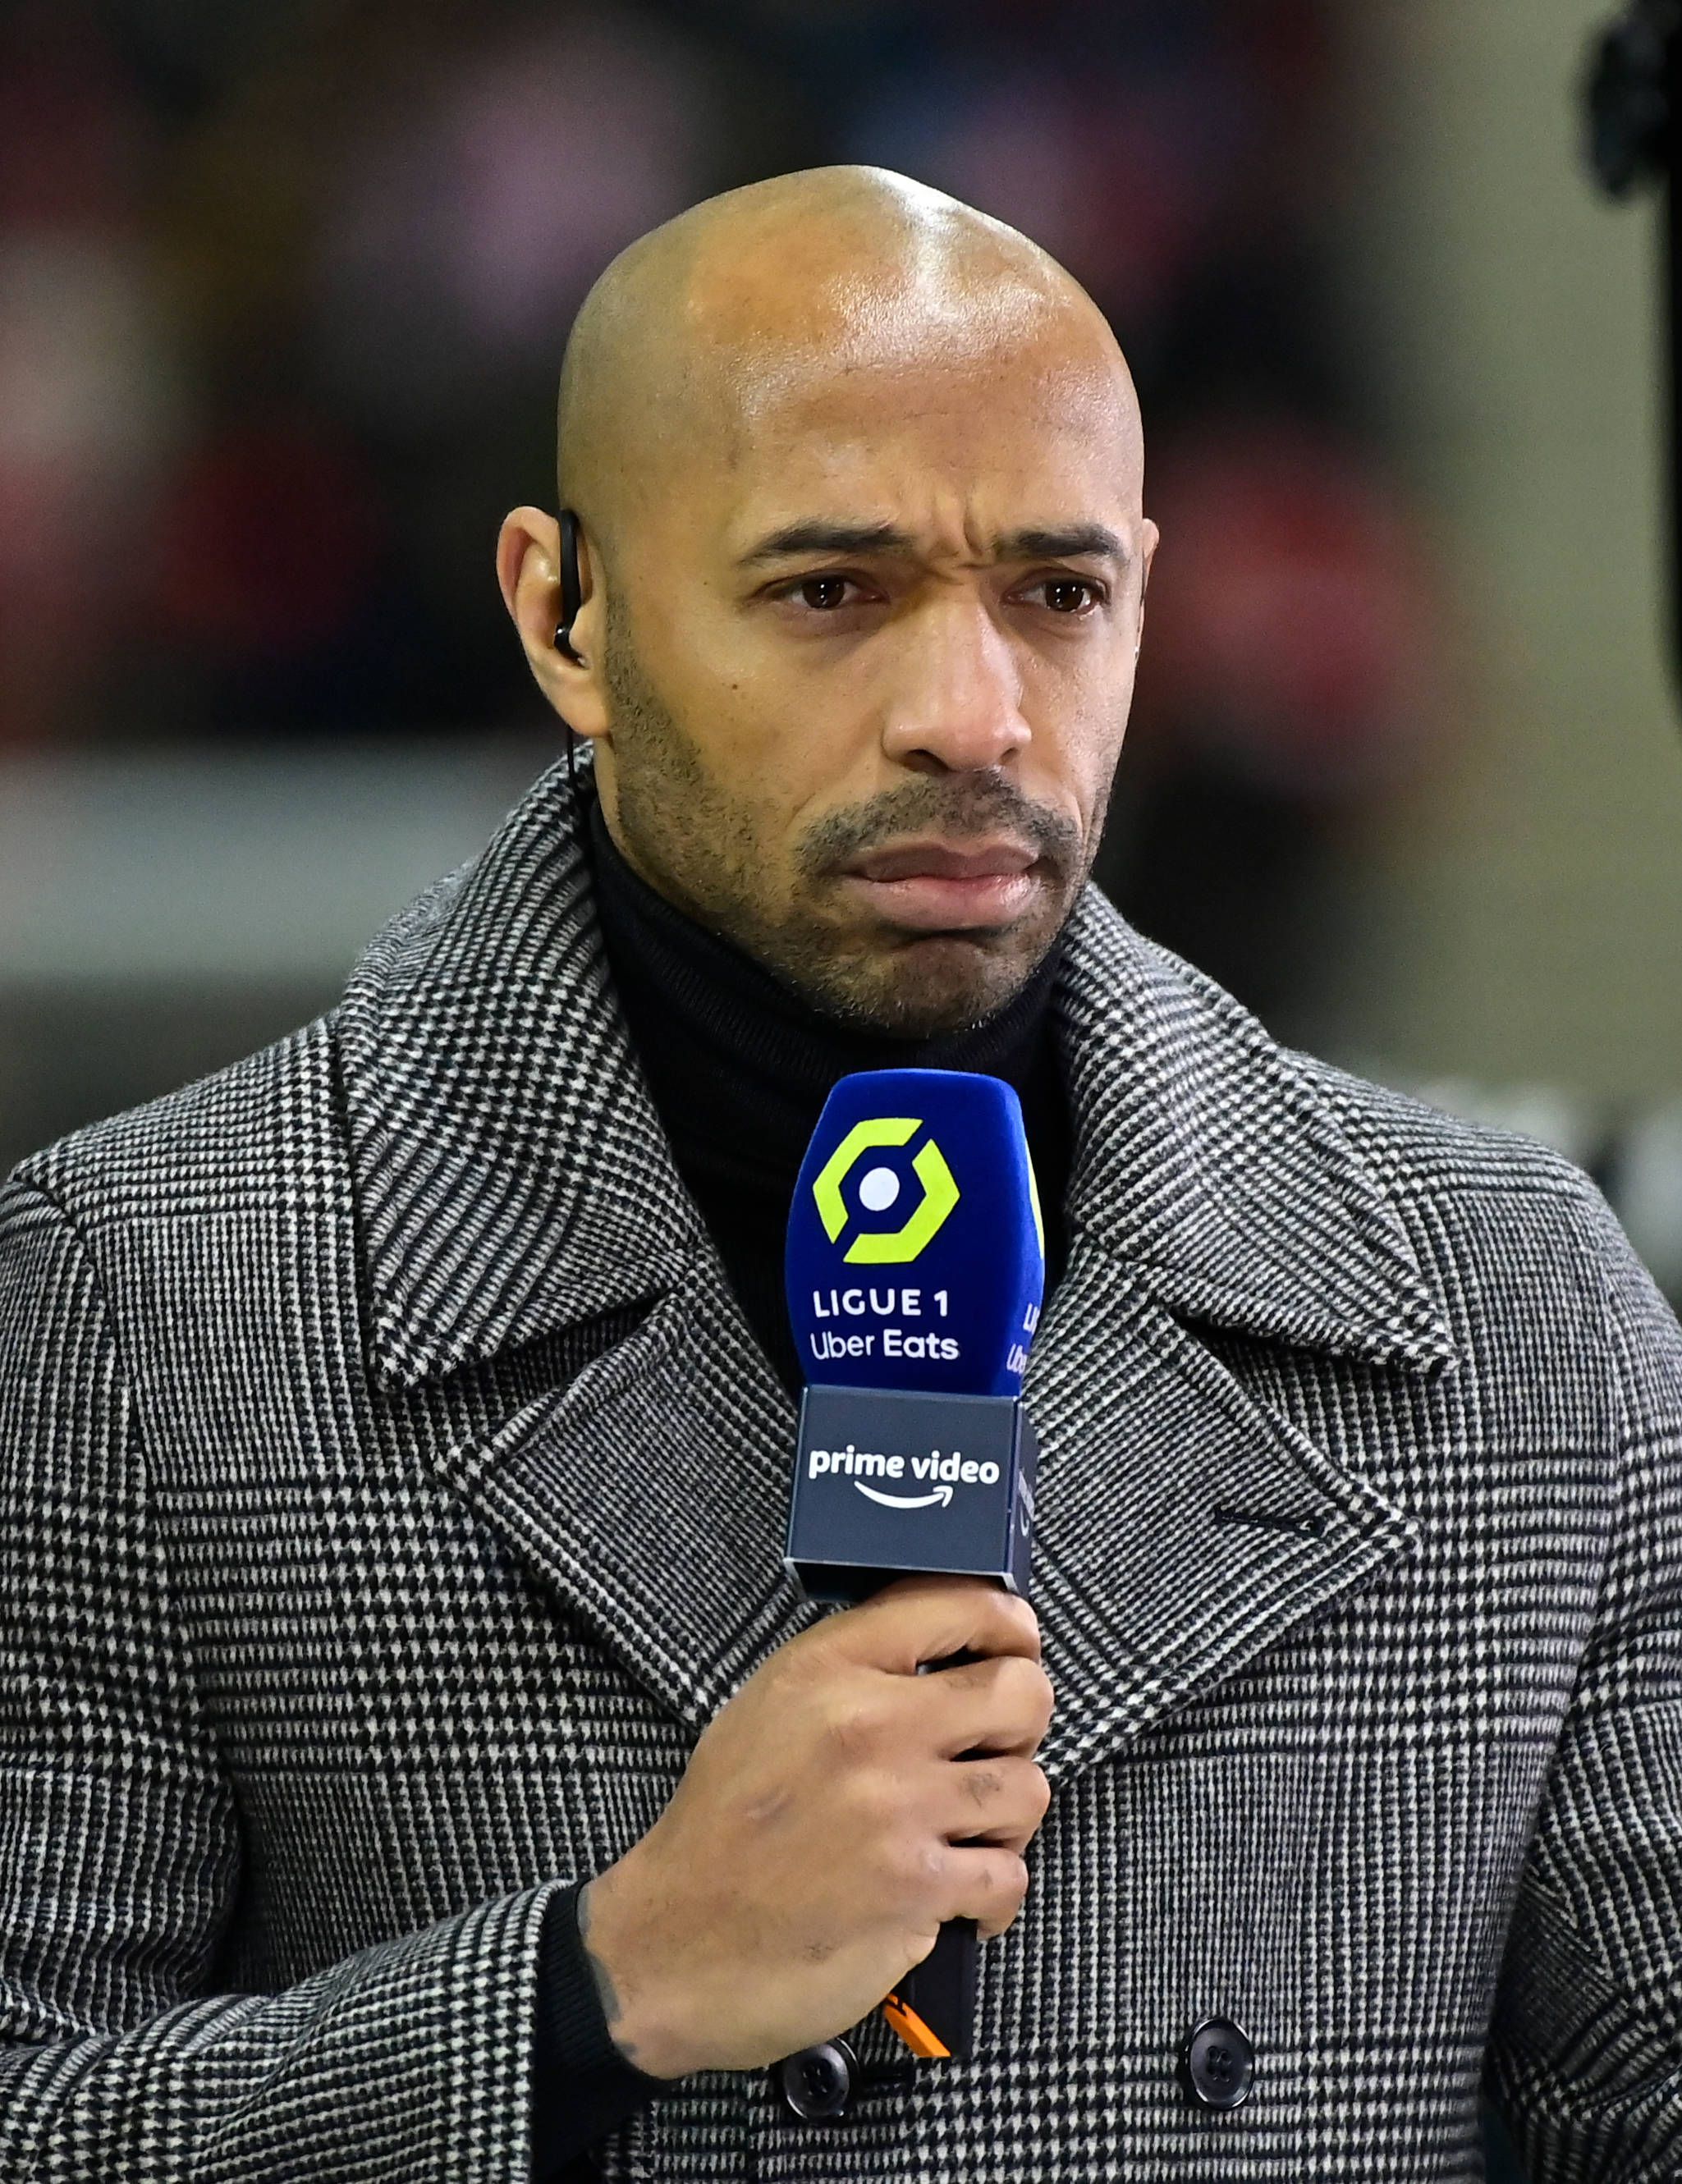 A threat to Thierry Henry, a racist statement or just a harmless